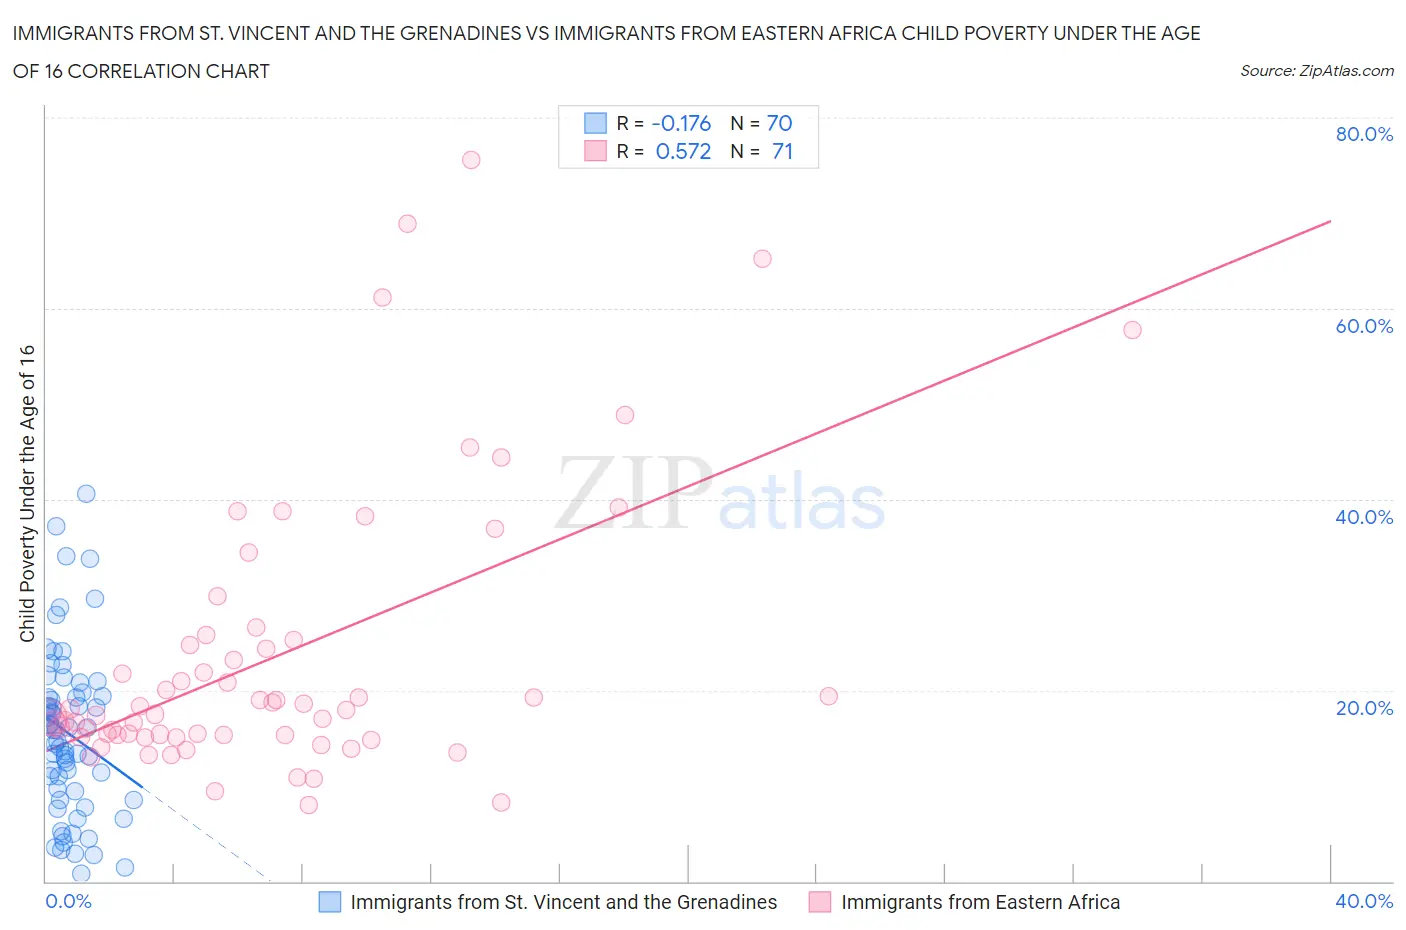 Immigrants from St. Vincent and the Grenadines vs Immigrants from Eastern Africa Child Poverty Under the Age of 16